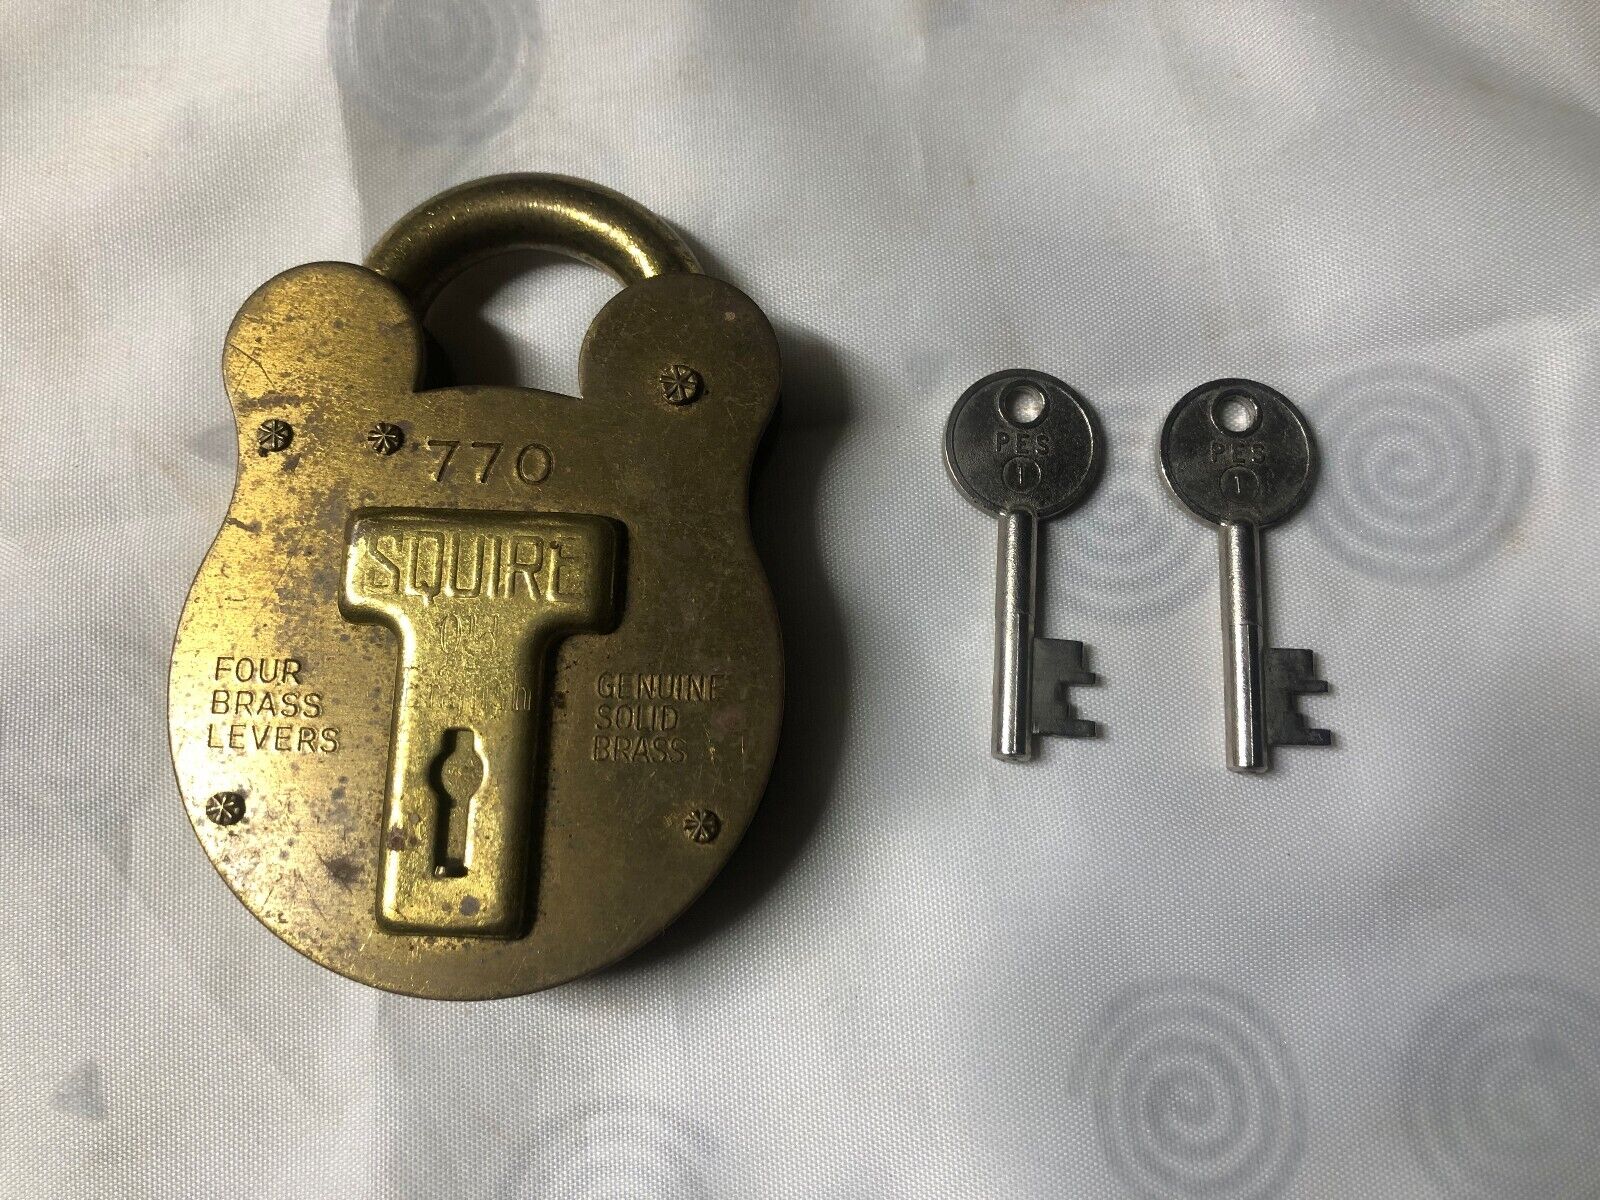 Vintage Squire 770 Old English Brass Lock With 2 Key Works Great